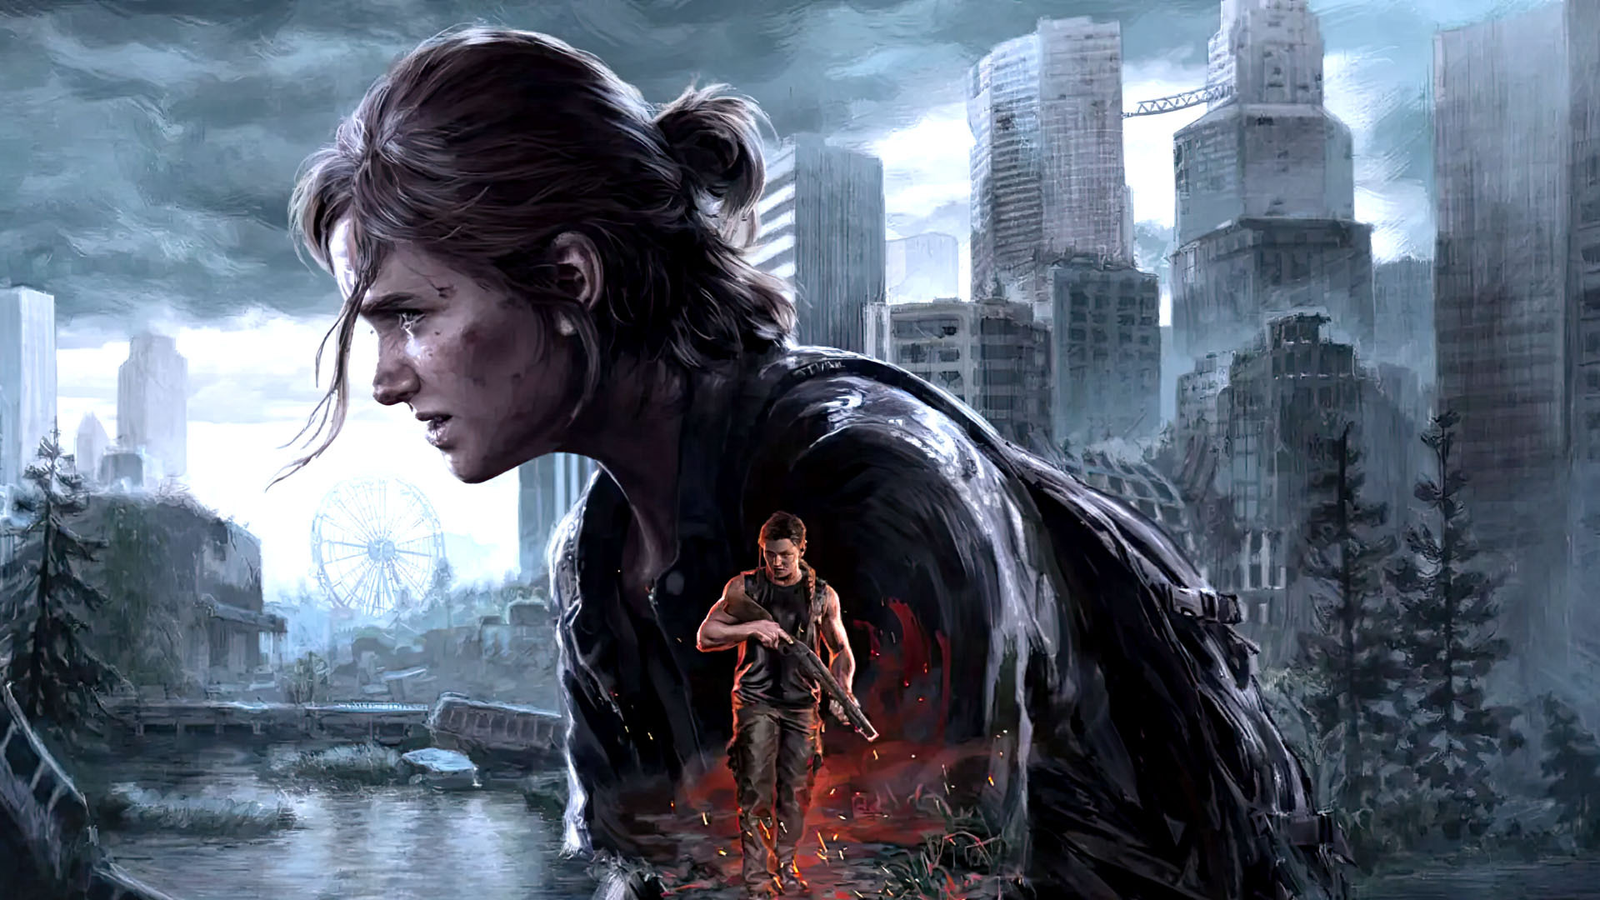 The Last of Us: Part 2 on PS5 supports haptic feedback